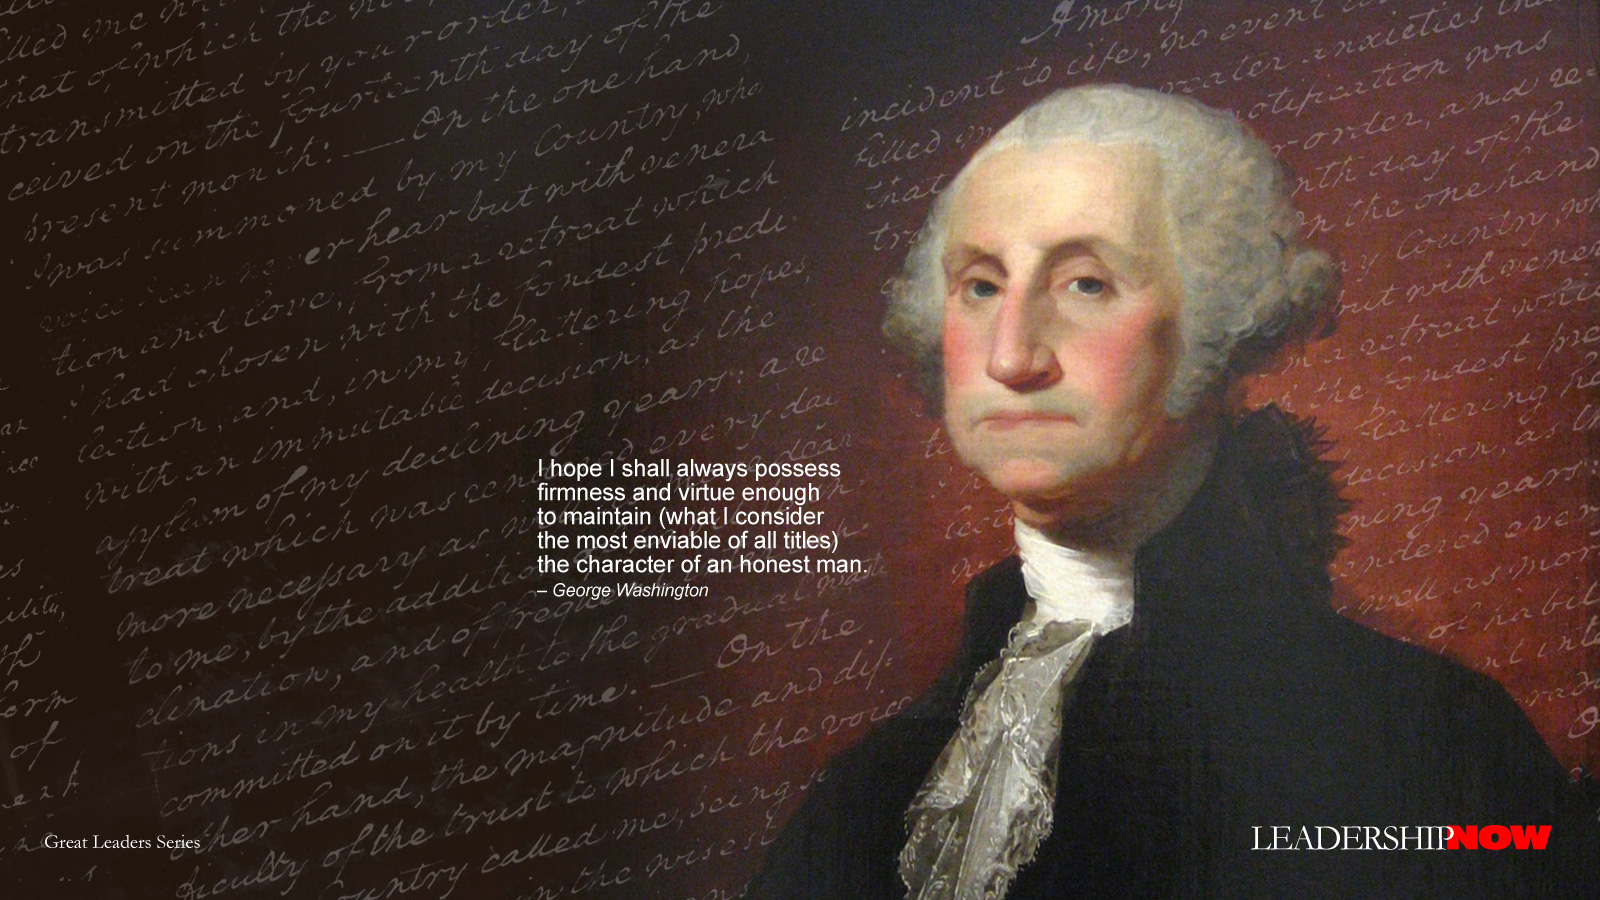 Bill Of Rights Quote About Freedom Of Speech - HD Wallpaper 